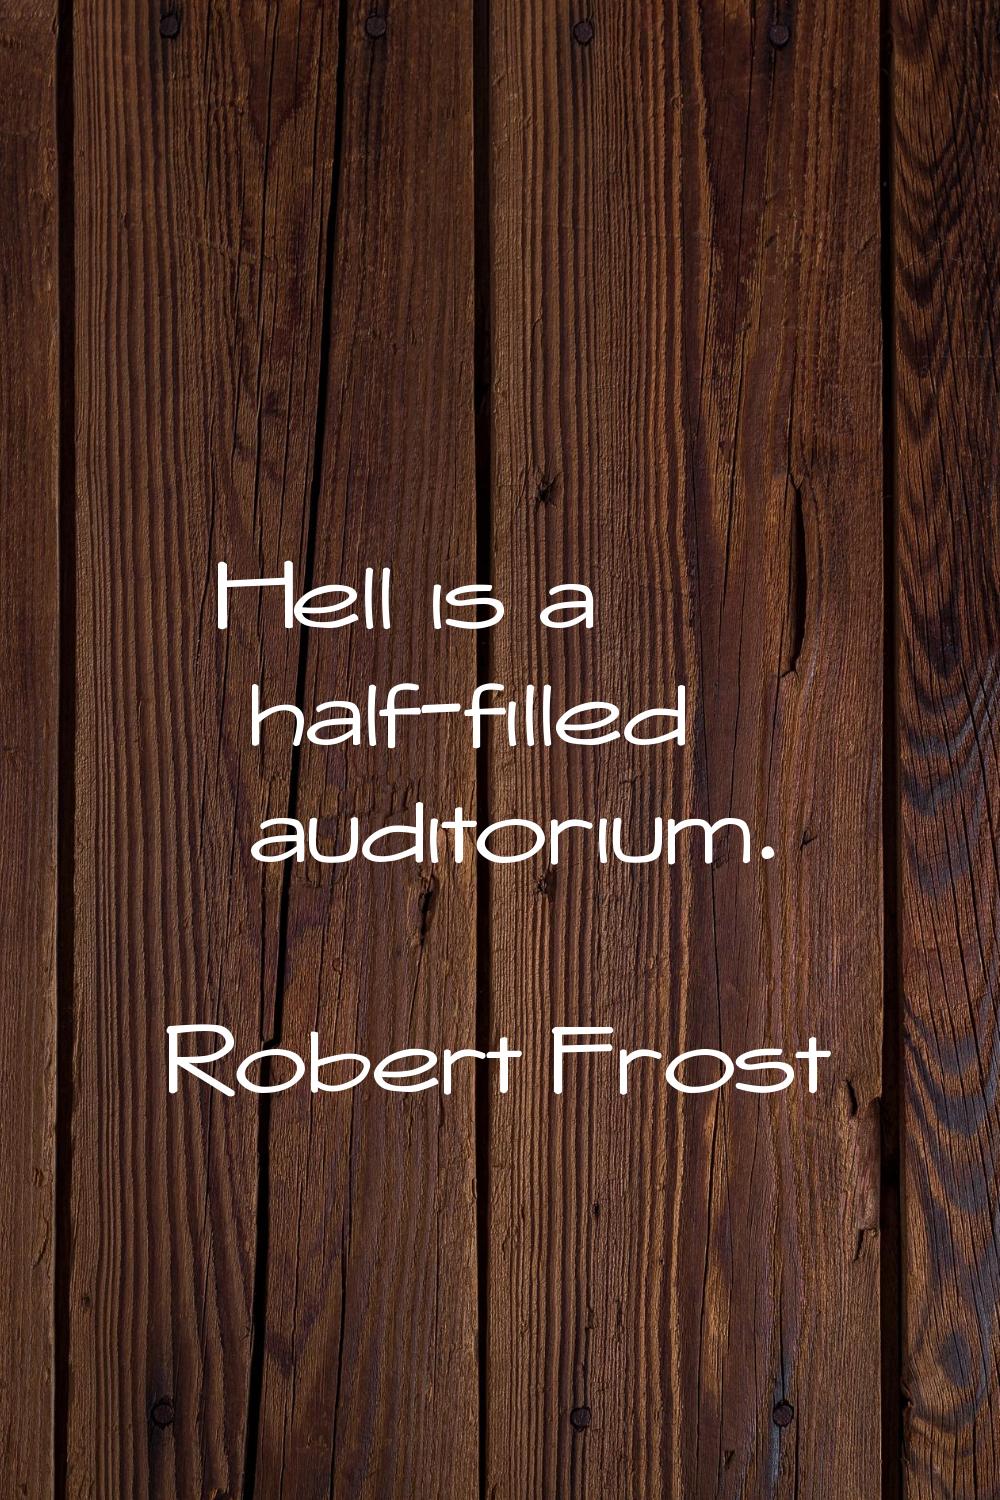 Hell is a half-filled auditorium.